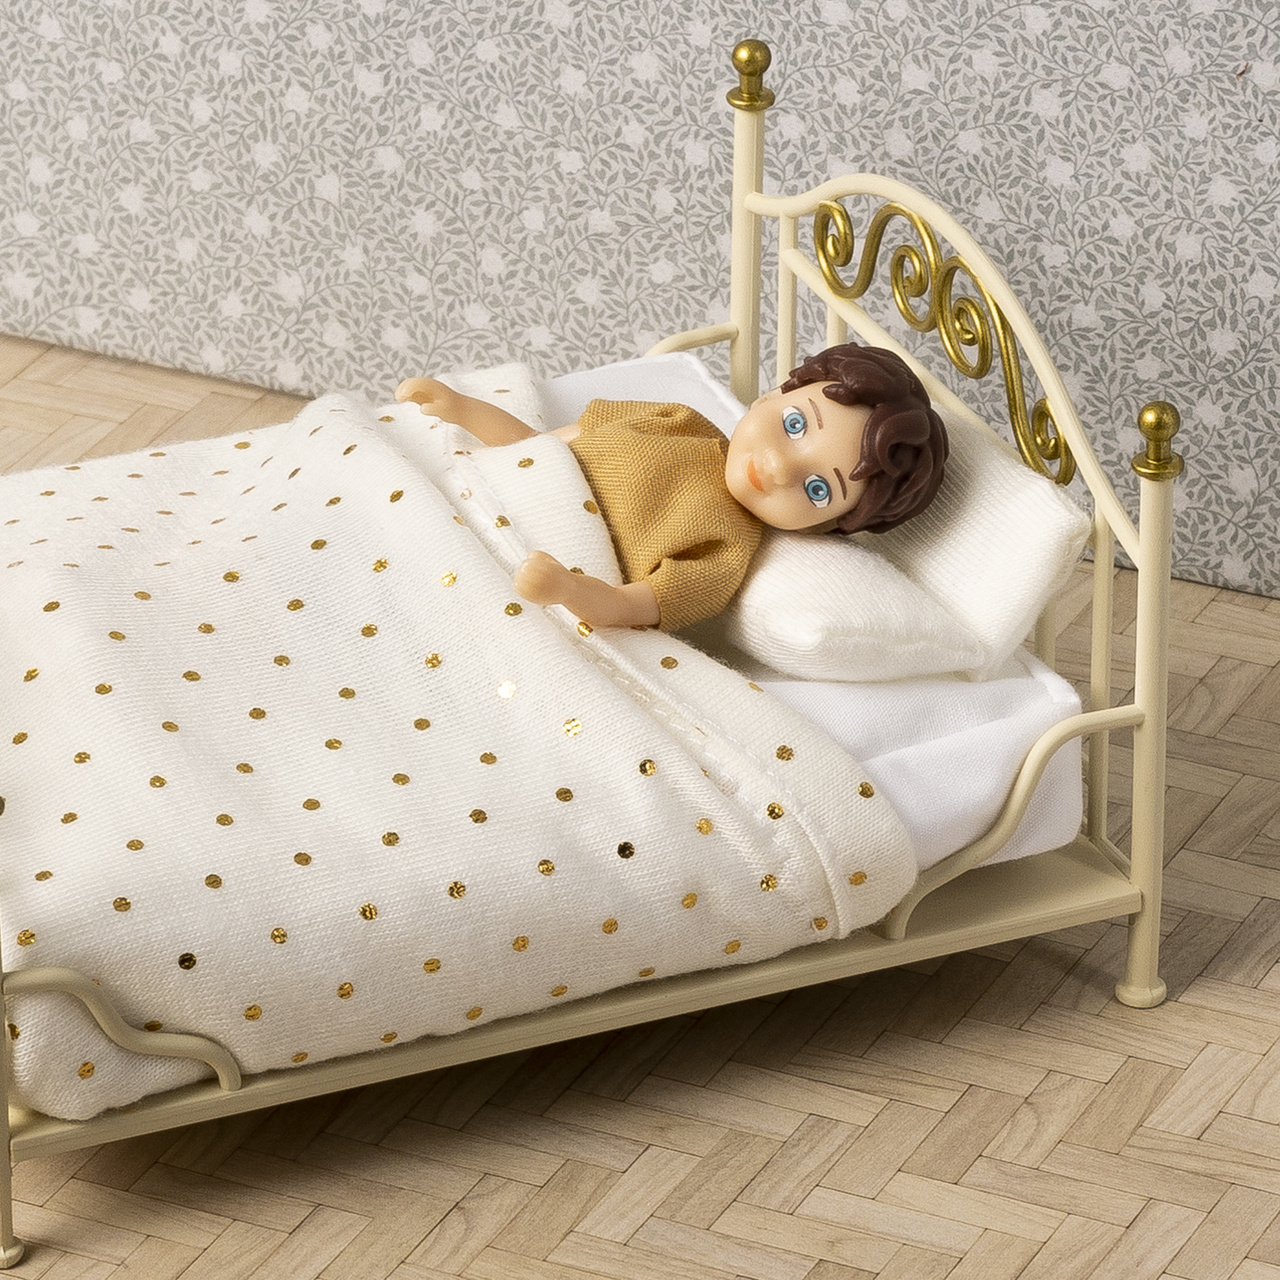 Doll house furniture & doll house accessories lundby dollhouse furniture bedroom set brass